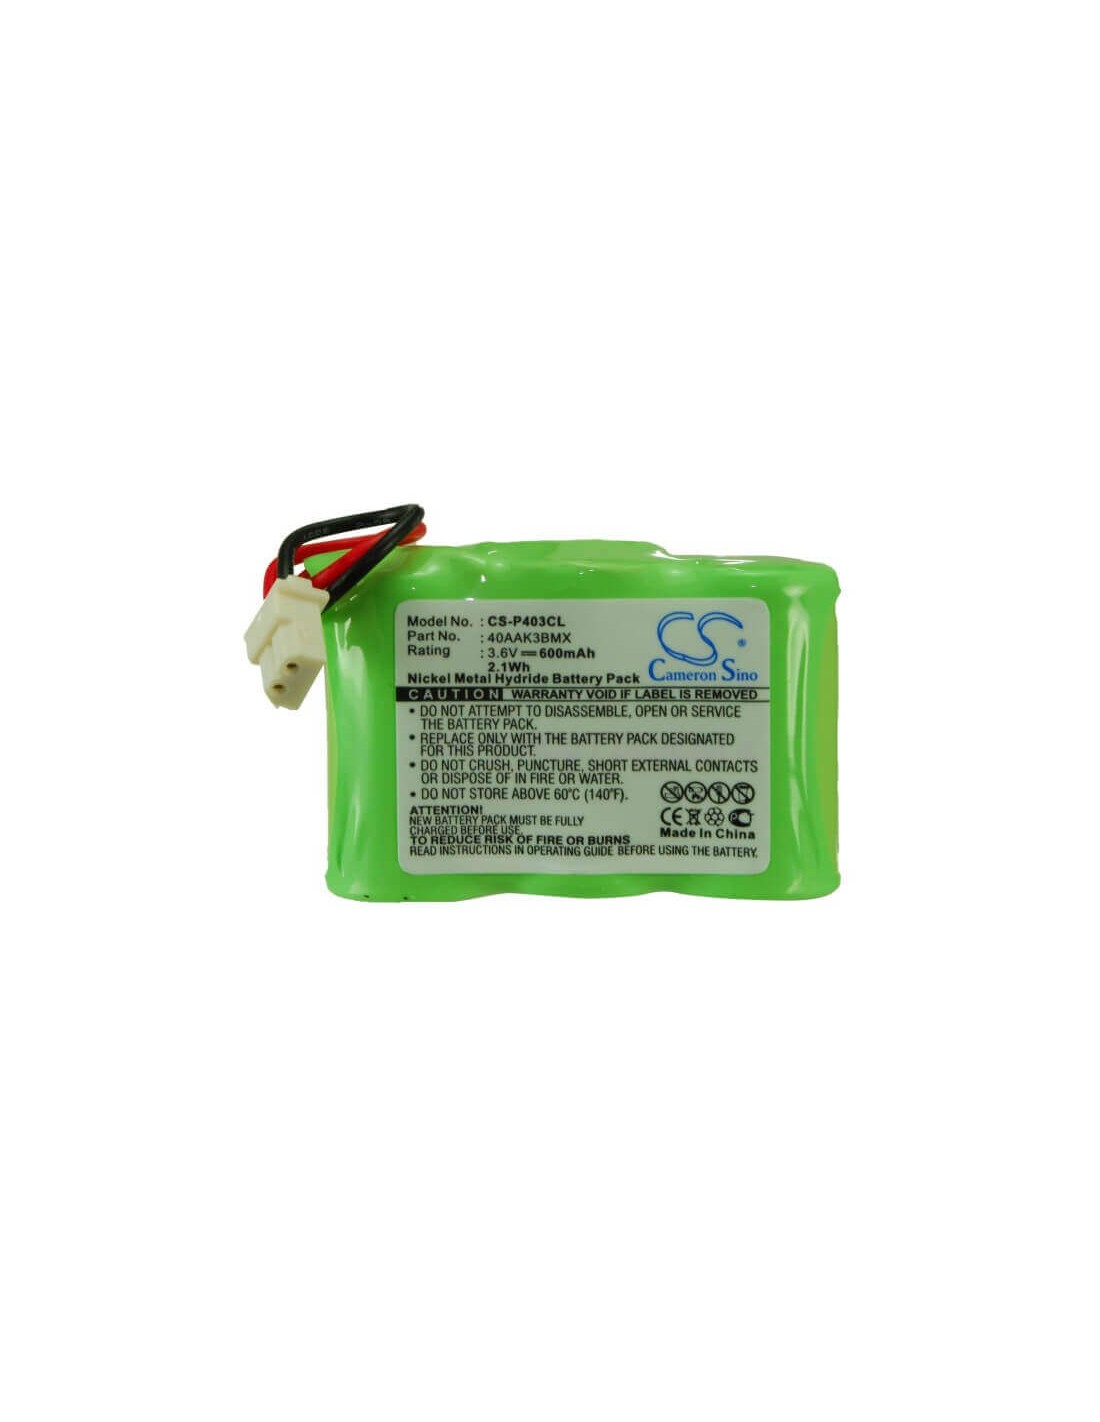 Battery for Conair, Ctp8210, Ctp8212, Ctp8225, Ctp8310, 3.6V, 600mAh - 2.16Wh